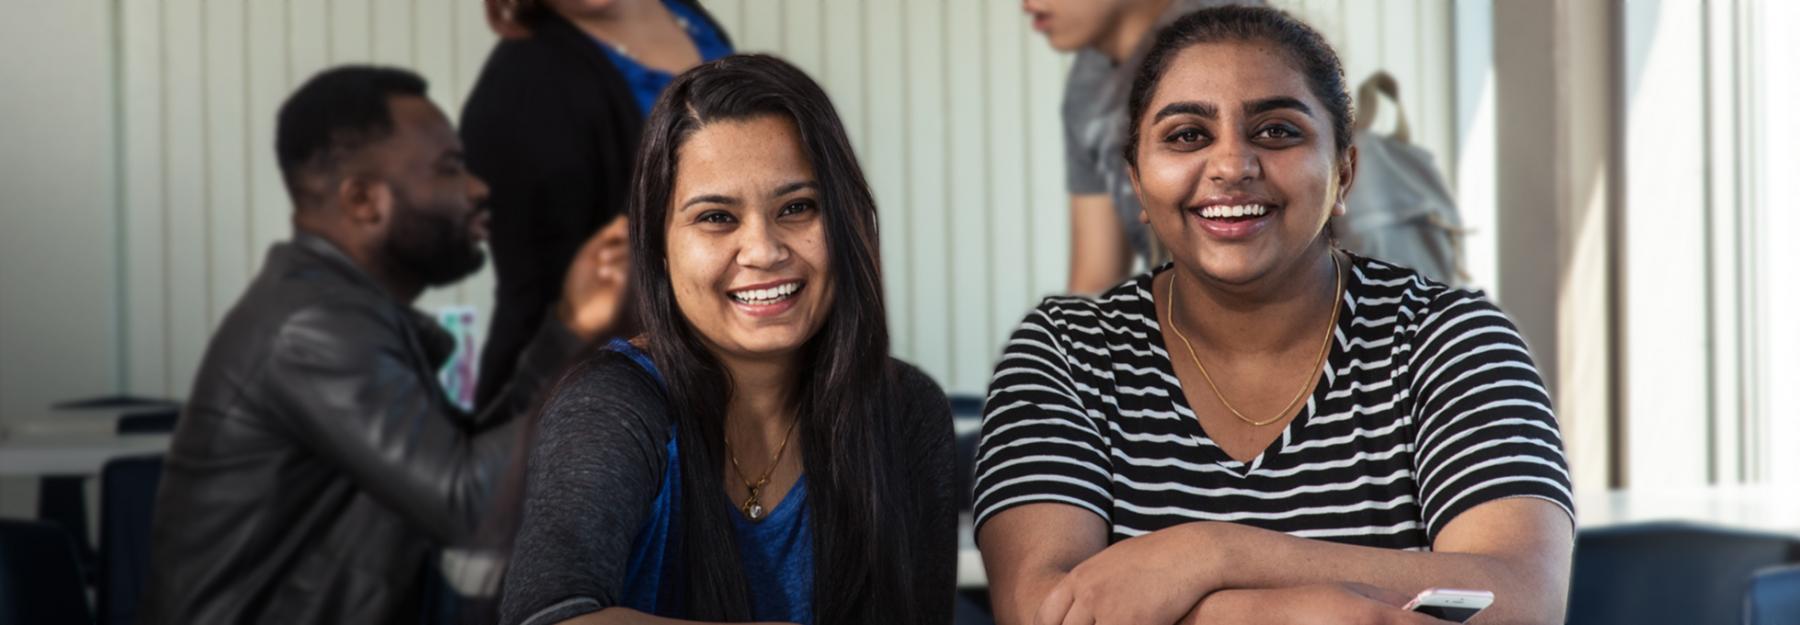 Two female international students looking into camera and smiling while in the college cafeteria